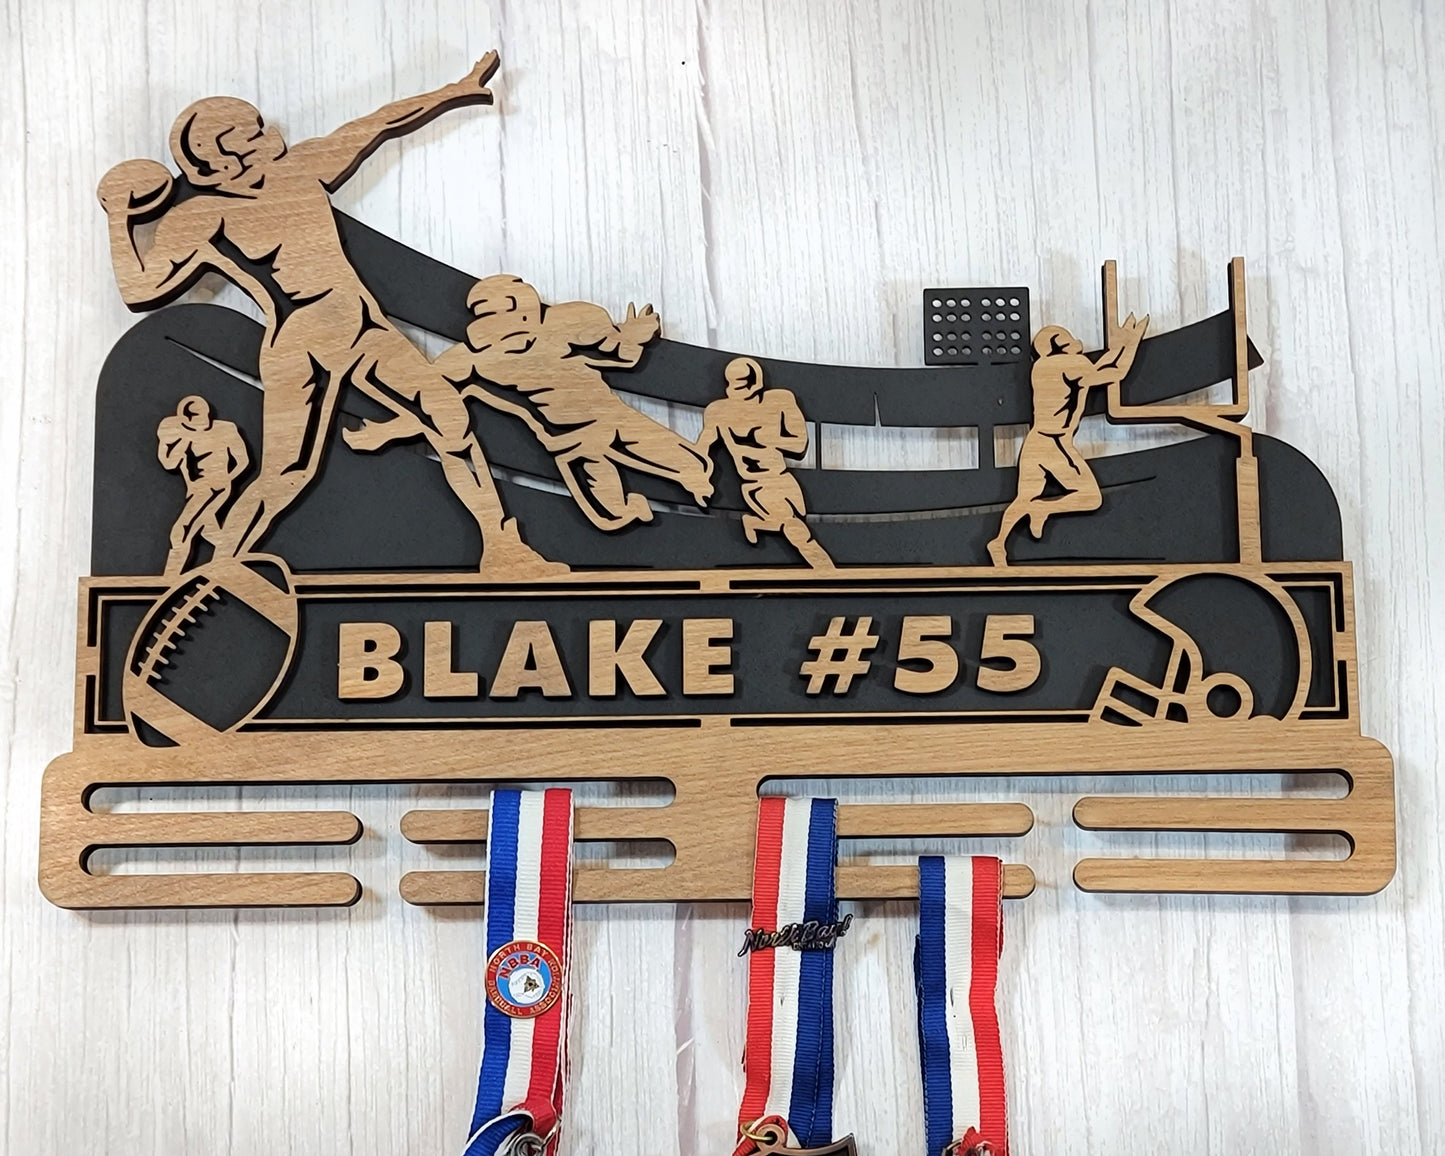 Stadium Series Medal Holders - Football - Male and Female Versions Included - SVG Files - Sized for Glowforge